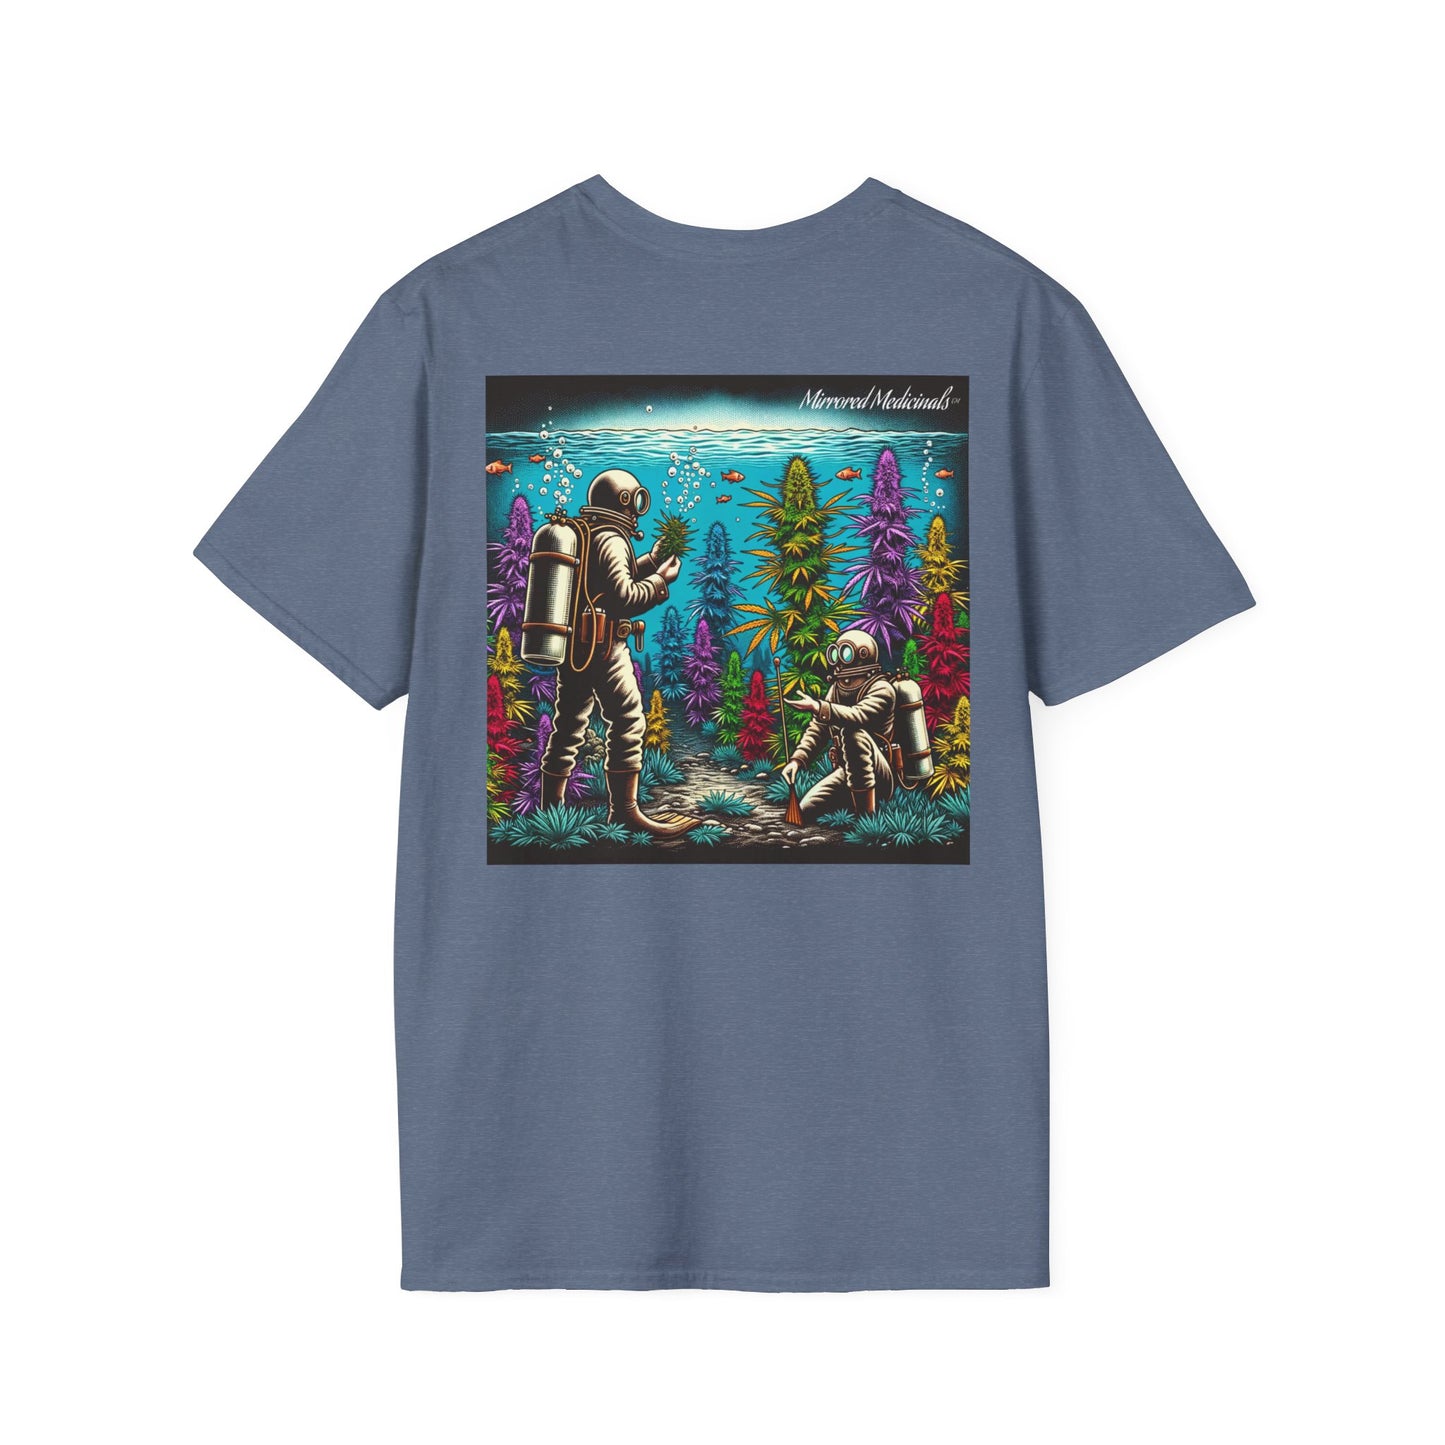 Sleeps in the Deep! 2 - Unisex Softstyle T-Shirt